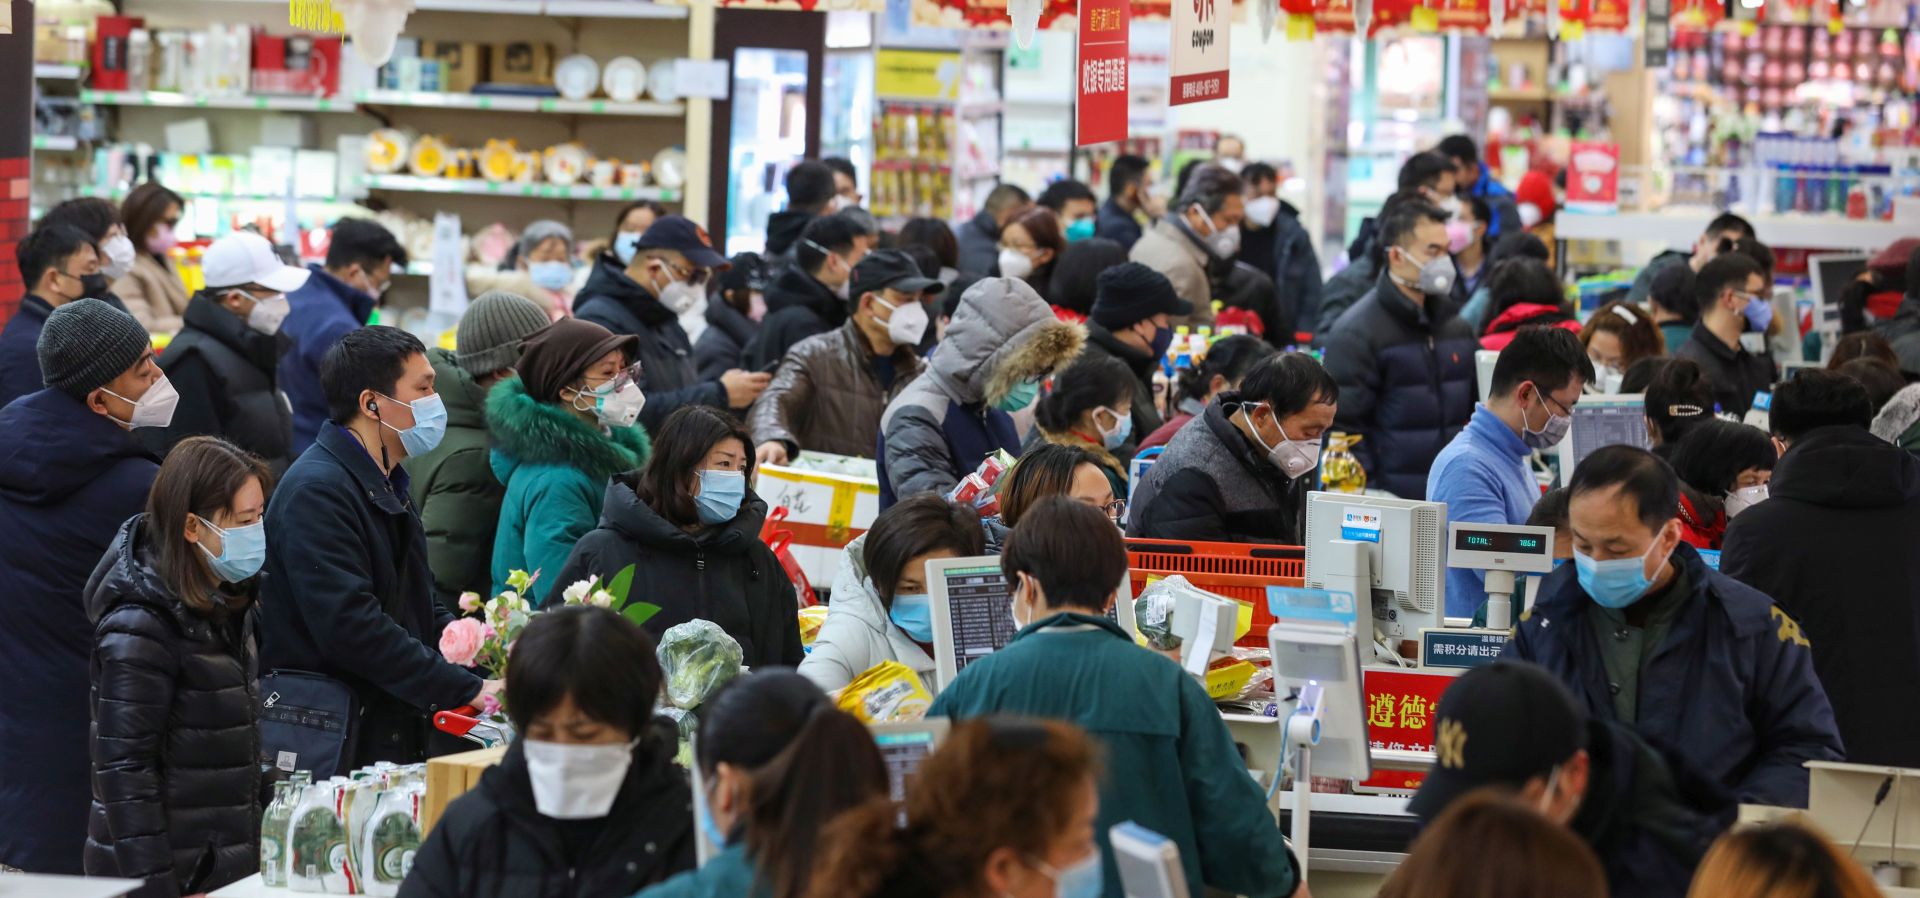 epa08163557 Shoppers wait to check out of a supermarket in Wuhan in central China's Hubei province 25 January 2020. The city struck by the 2019-nCoV virus will ban private traffic starting on Sunday, prompting citizens to a shopping spree of necessities and groceries.  EPA/YUAN ZHENG CHINA OUT